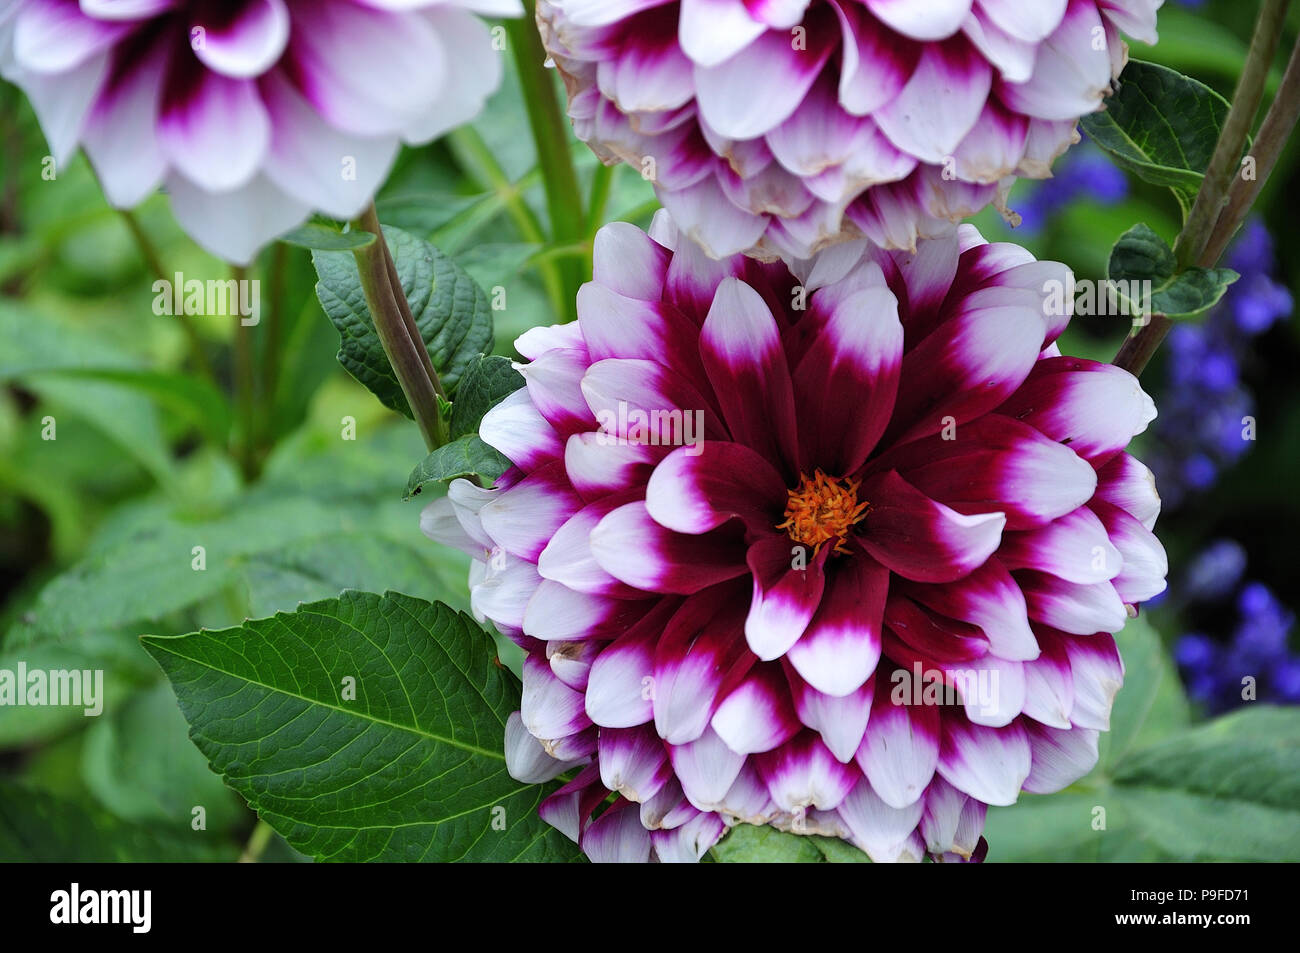 close-up of ball shaped dahlia flowerhead with bicolored petals Stock Photo